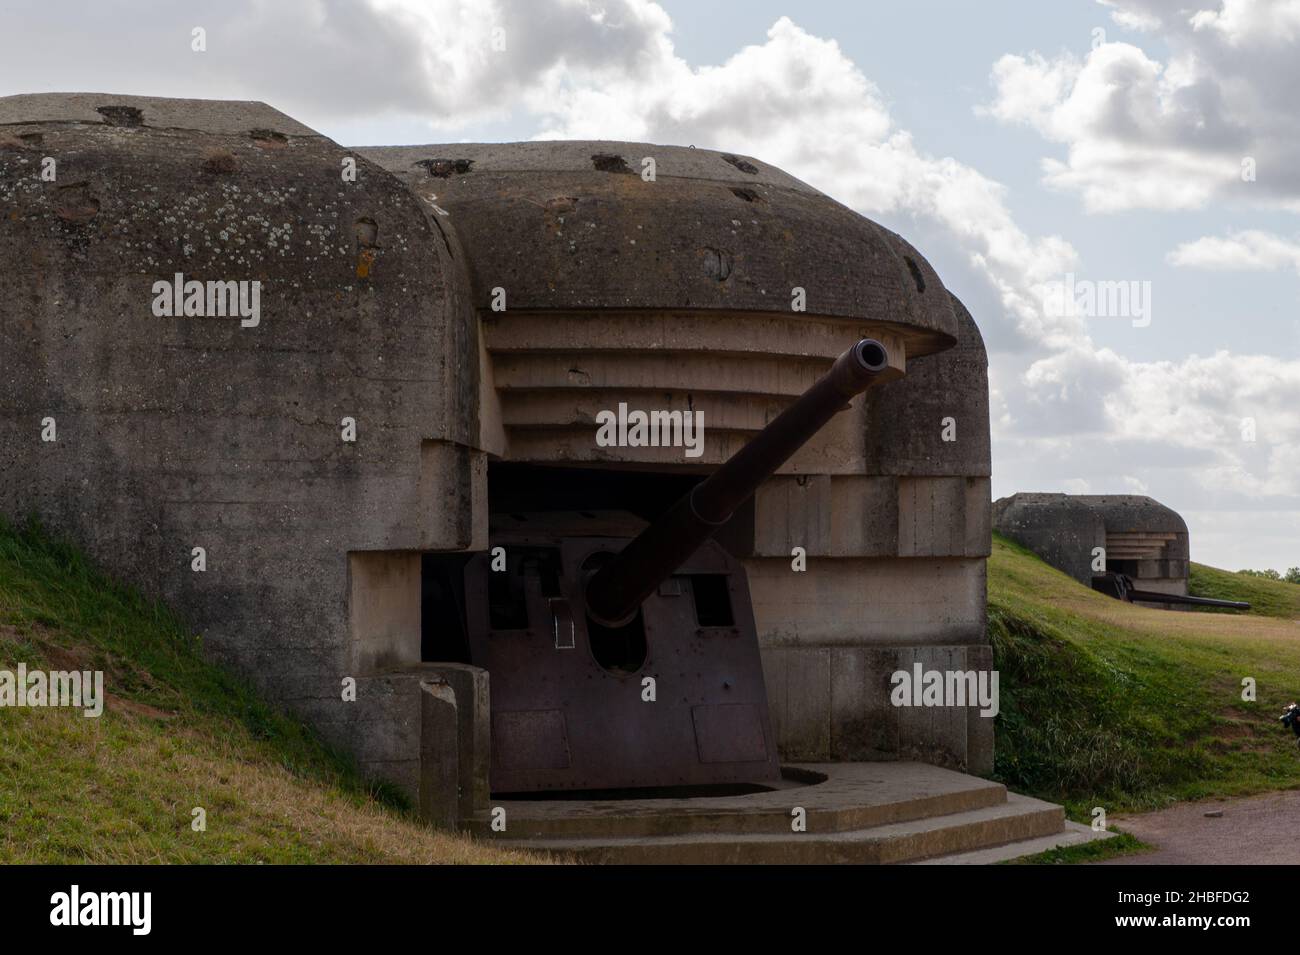 Bunker at Longues-sur-Mer, Normandy,France Stock Photo